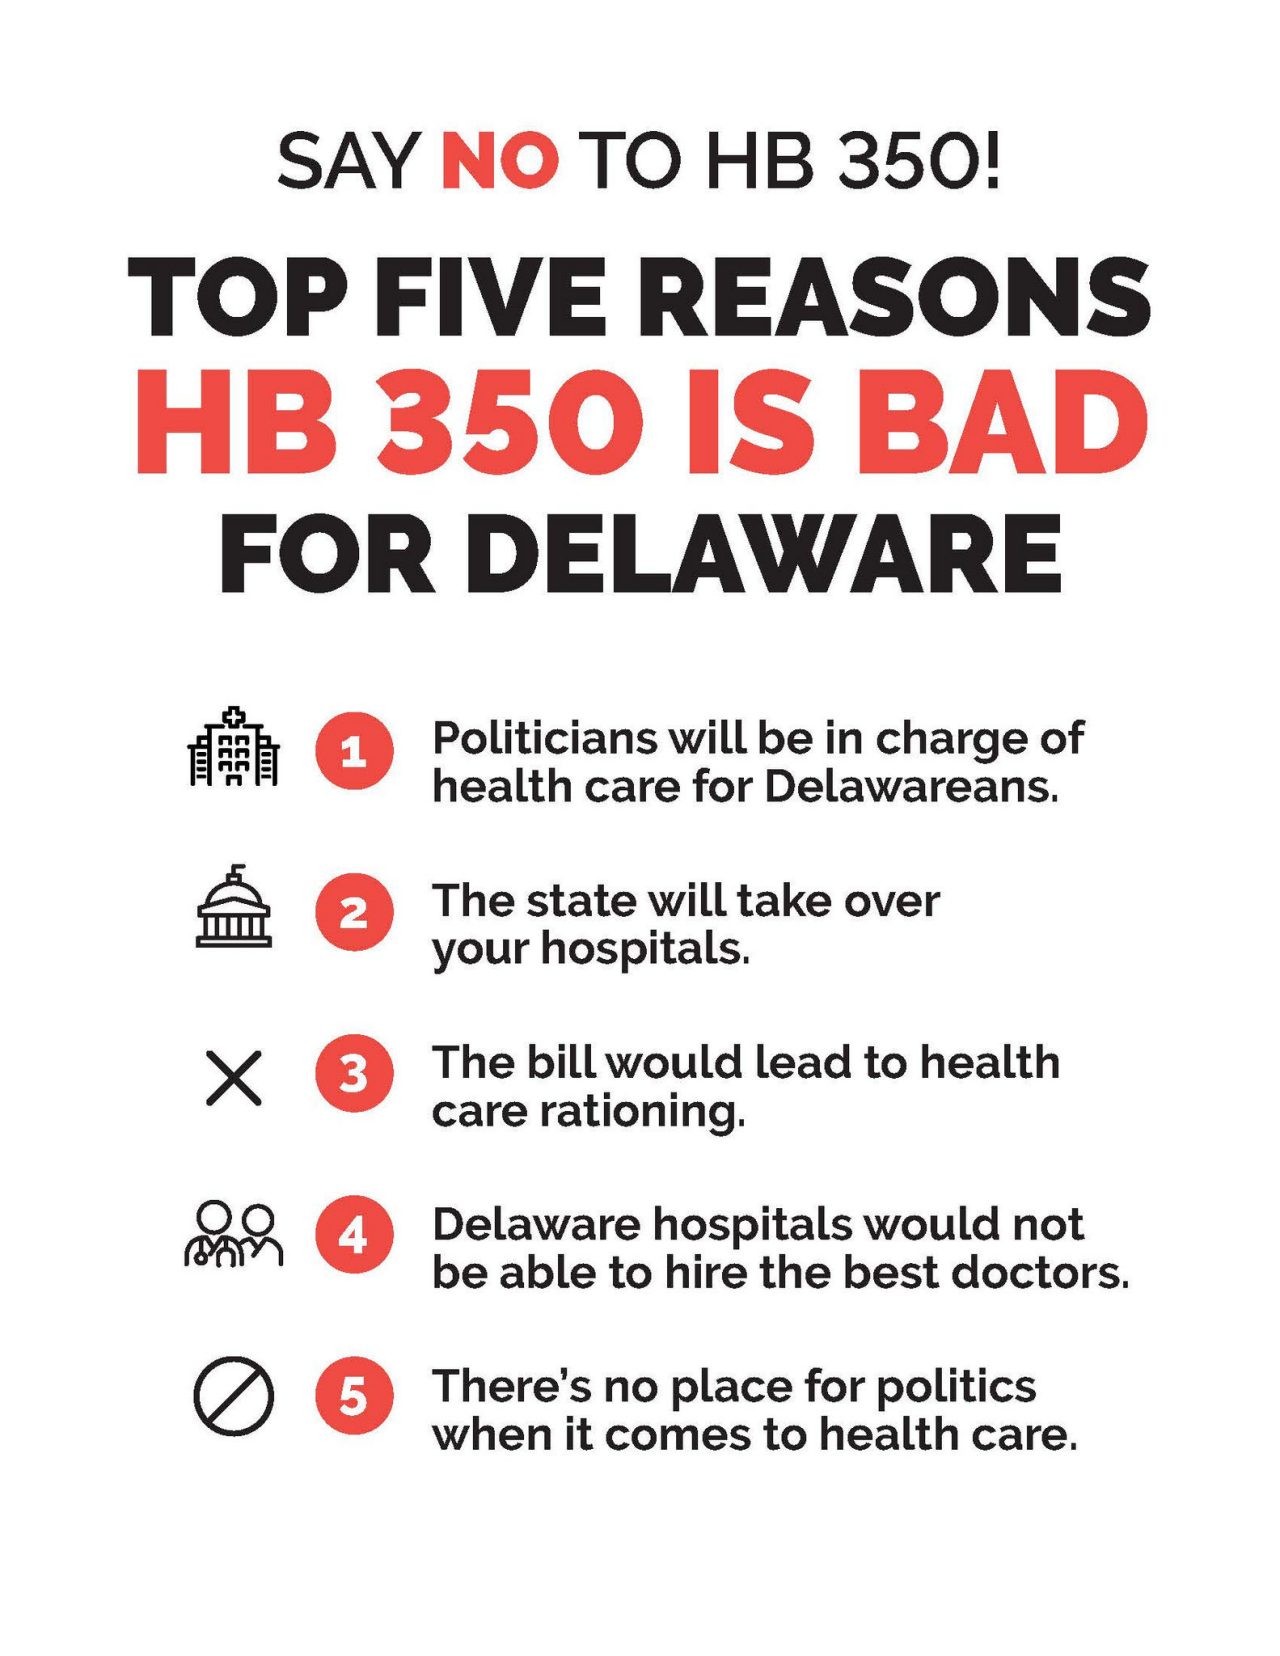 Infographic - Top 5 Reasons HB350 is Bad for Delaware